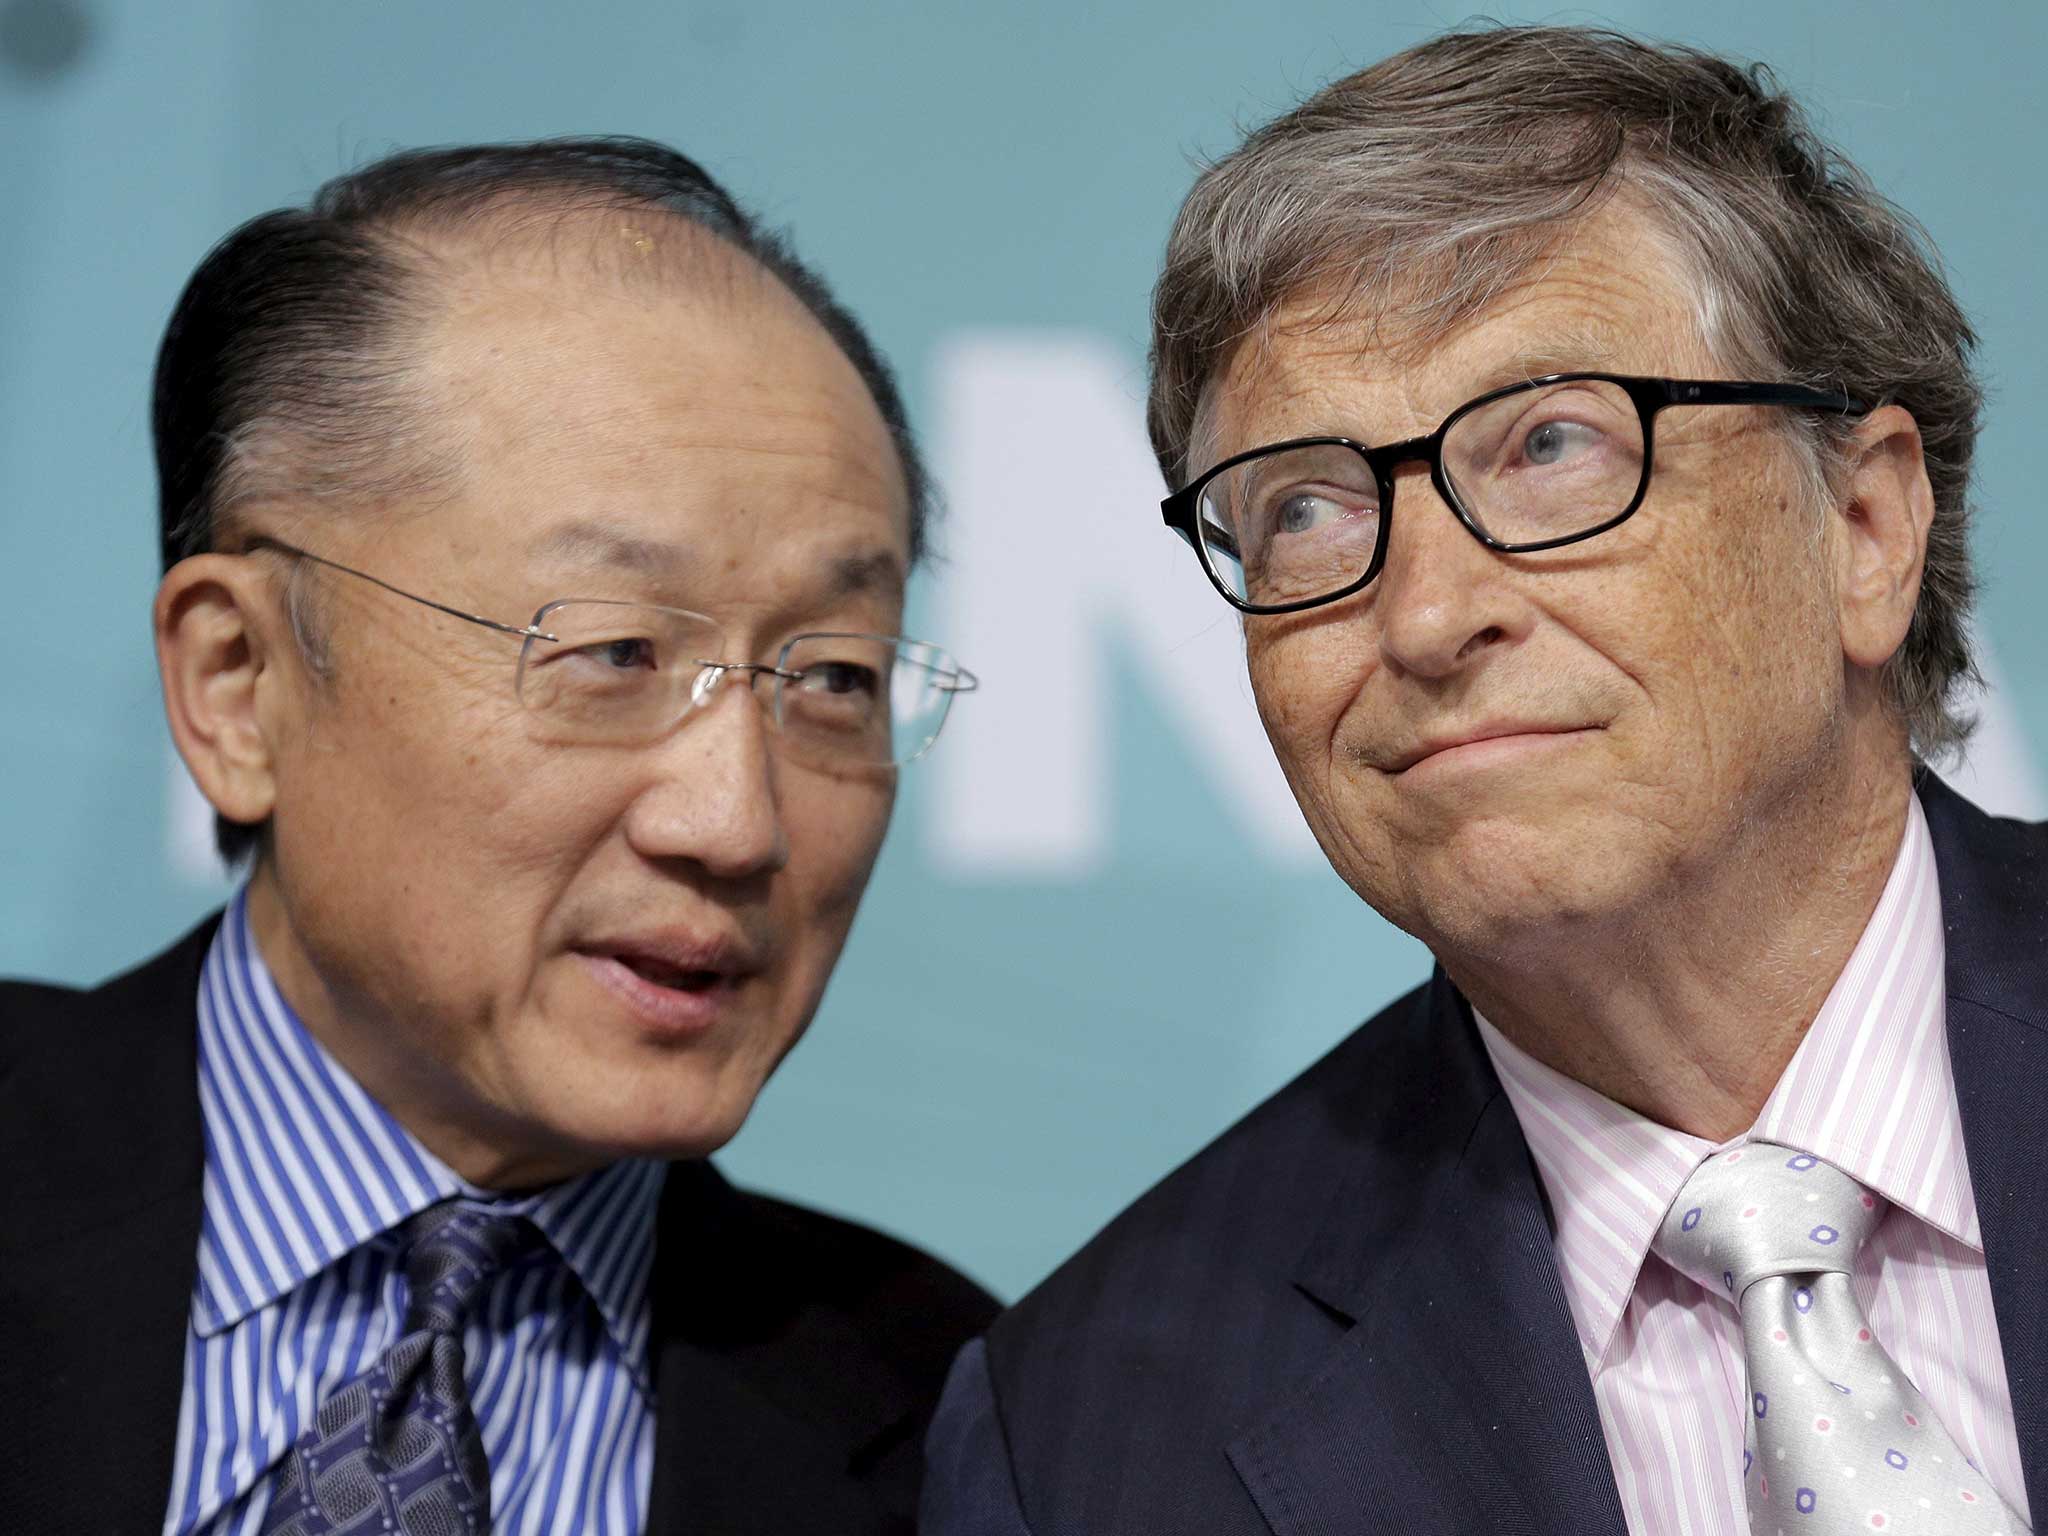 World Bank President Jim Yong Kim speaks with Microsoft co-founder Bill Gates at a forum on financial development at the 2016 IMF World Bank Spring Meeting in Washington